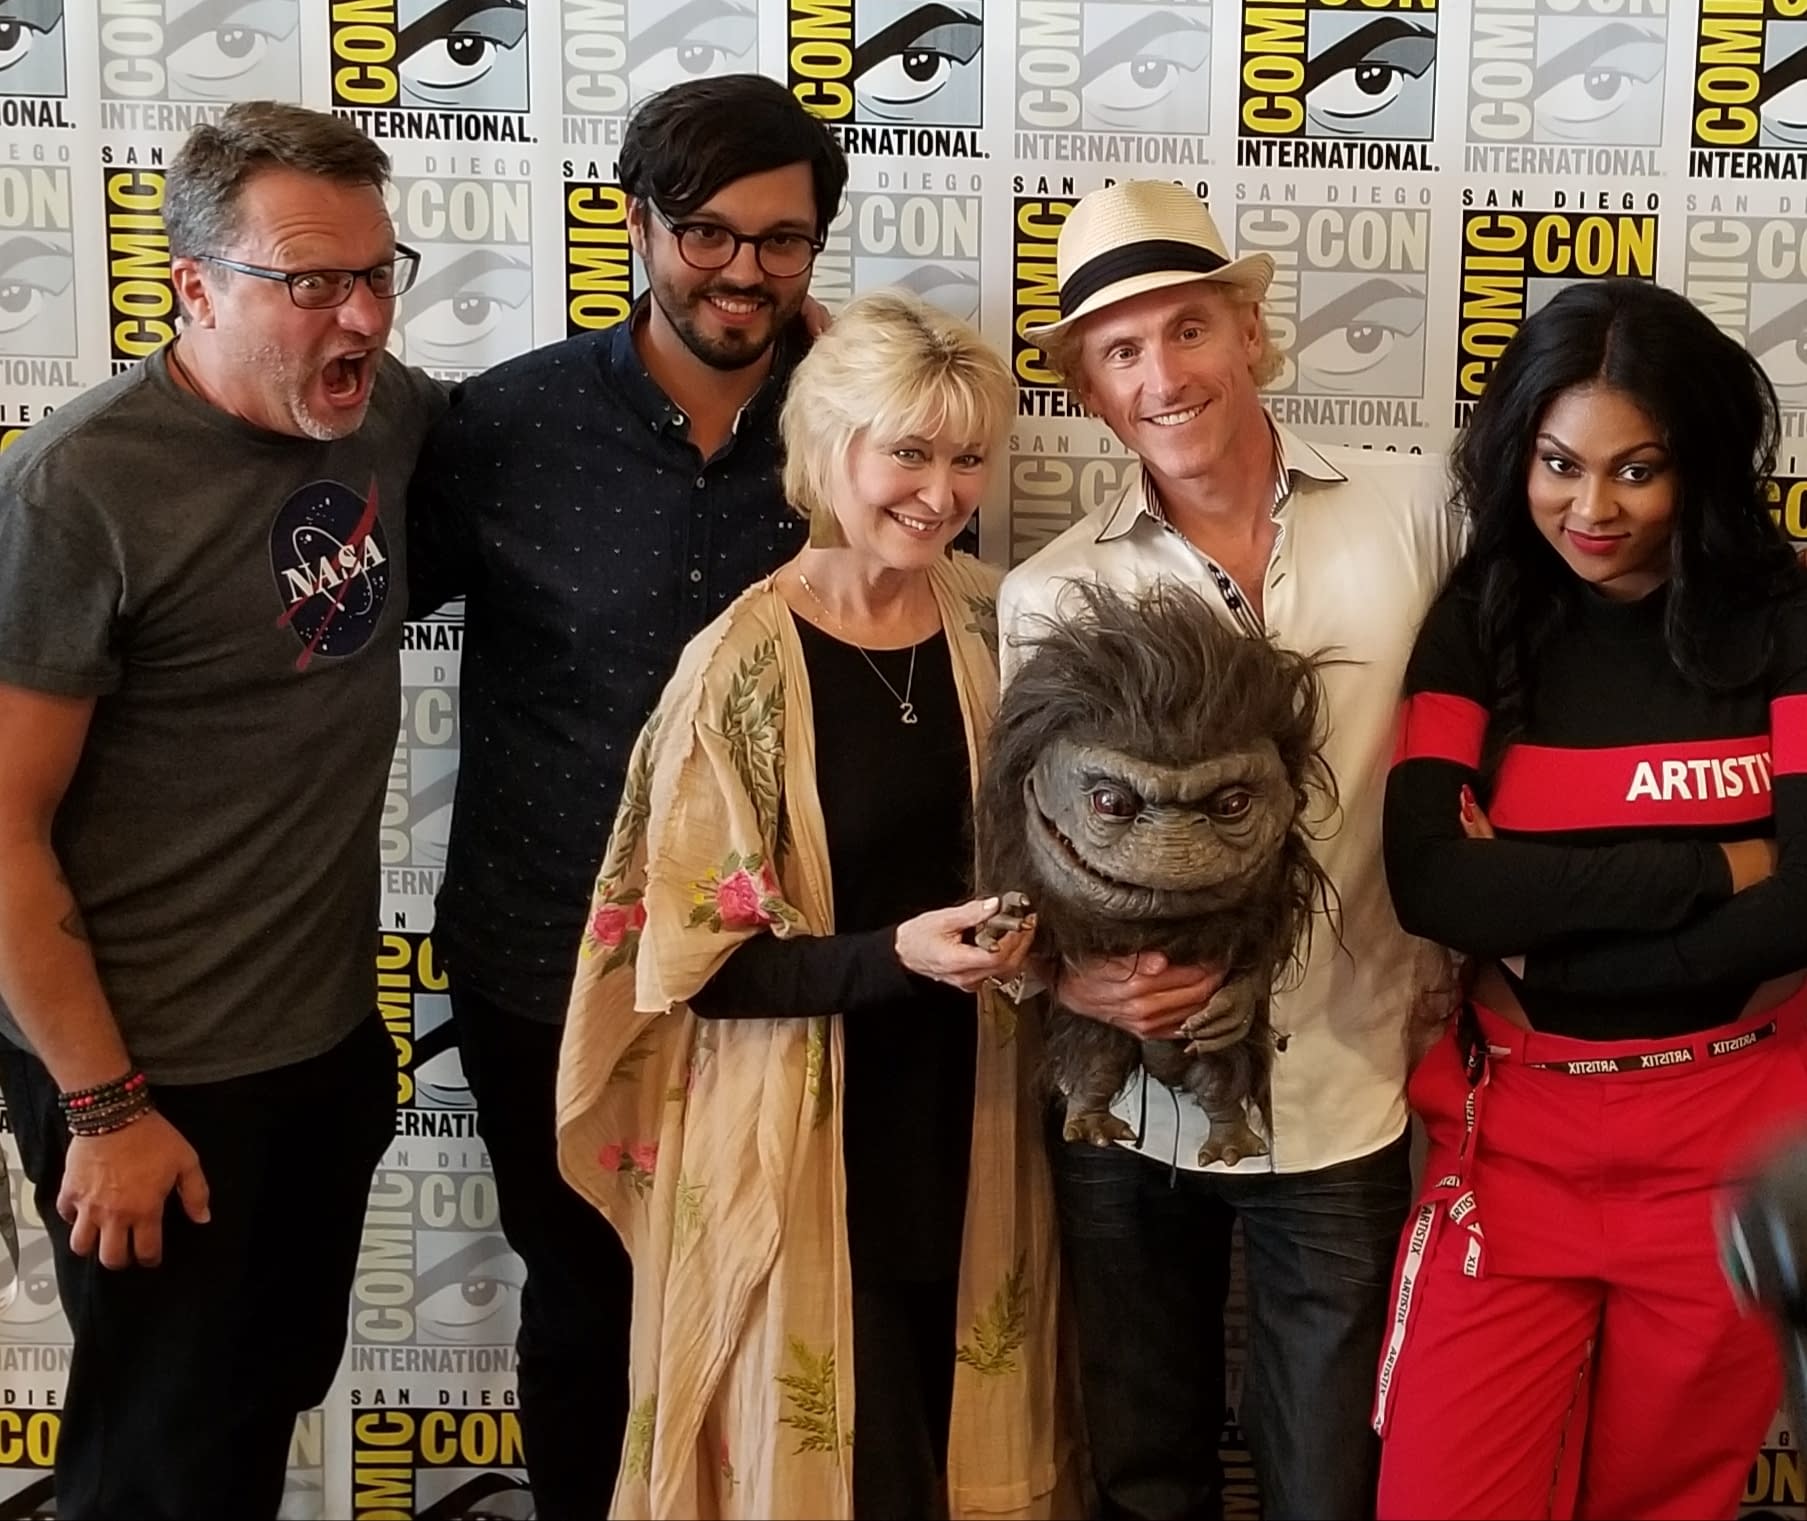 Dee Wallace Talks Critters Attack! : Roundtable Video